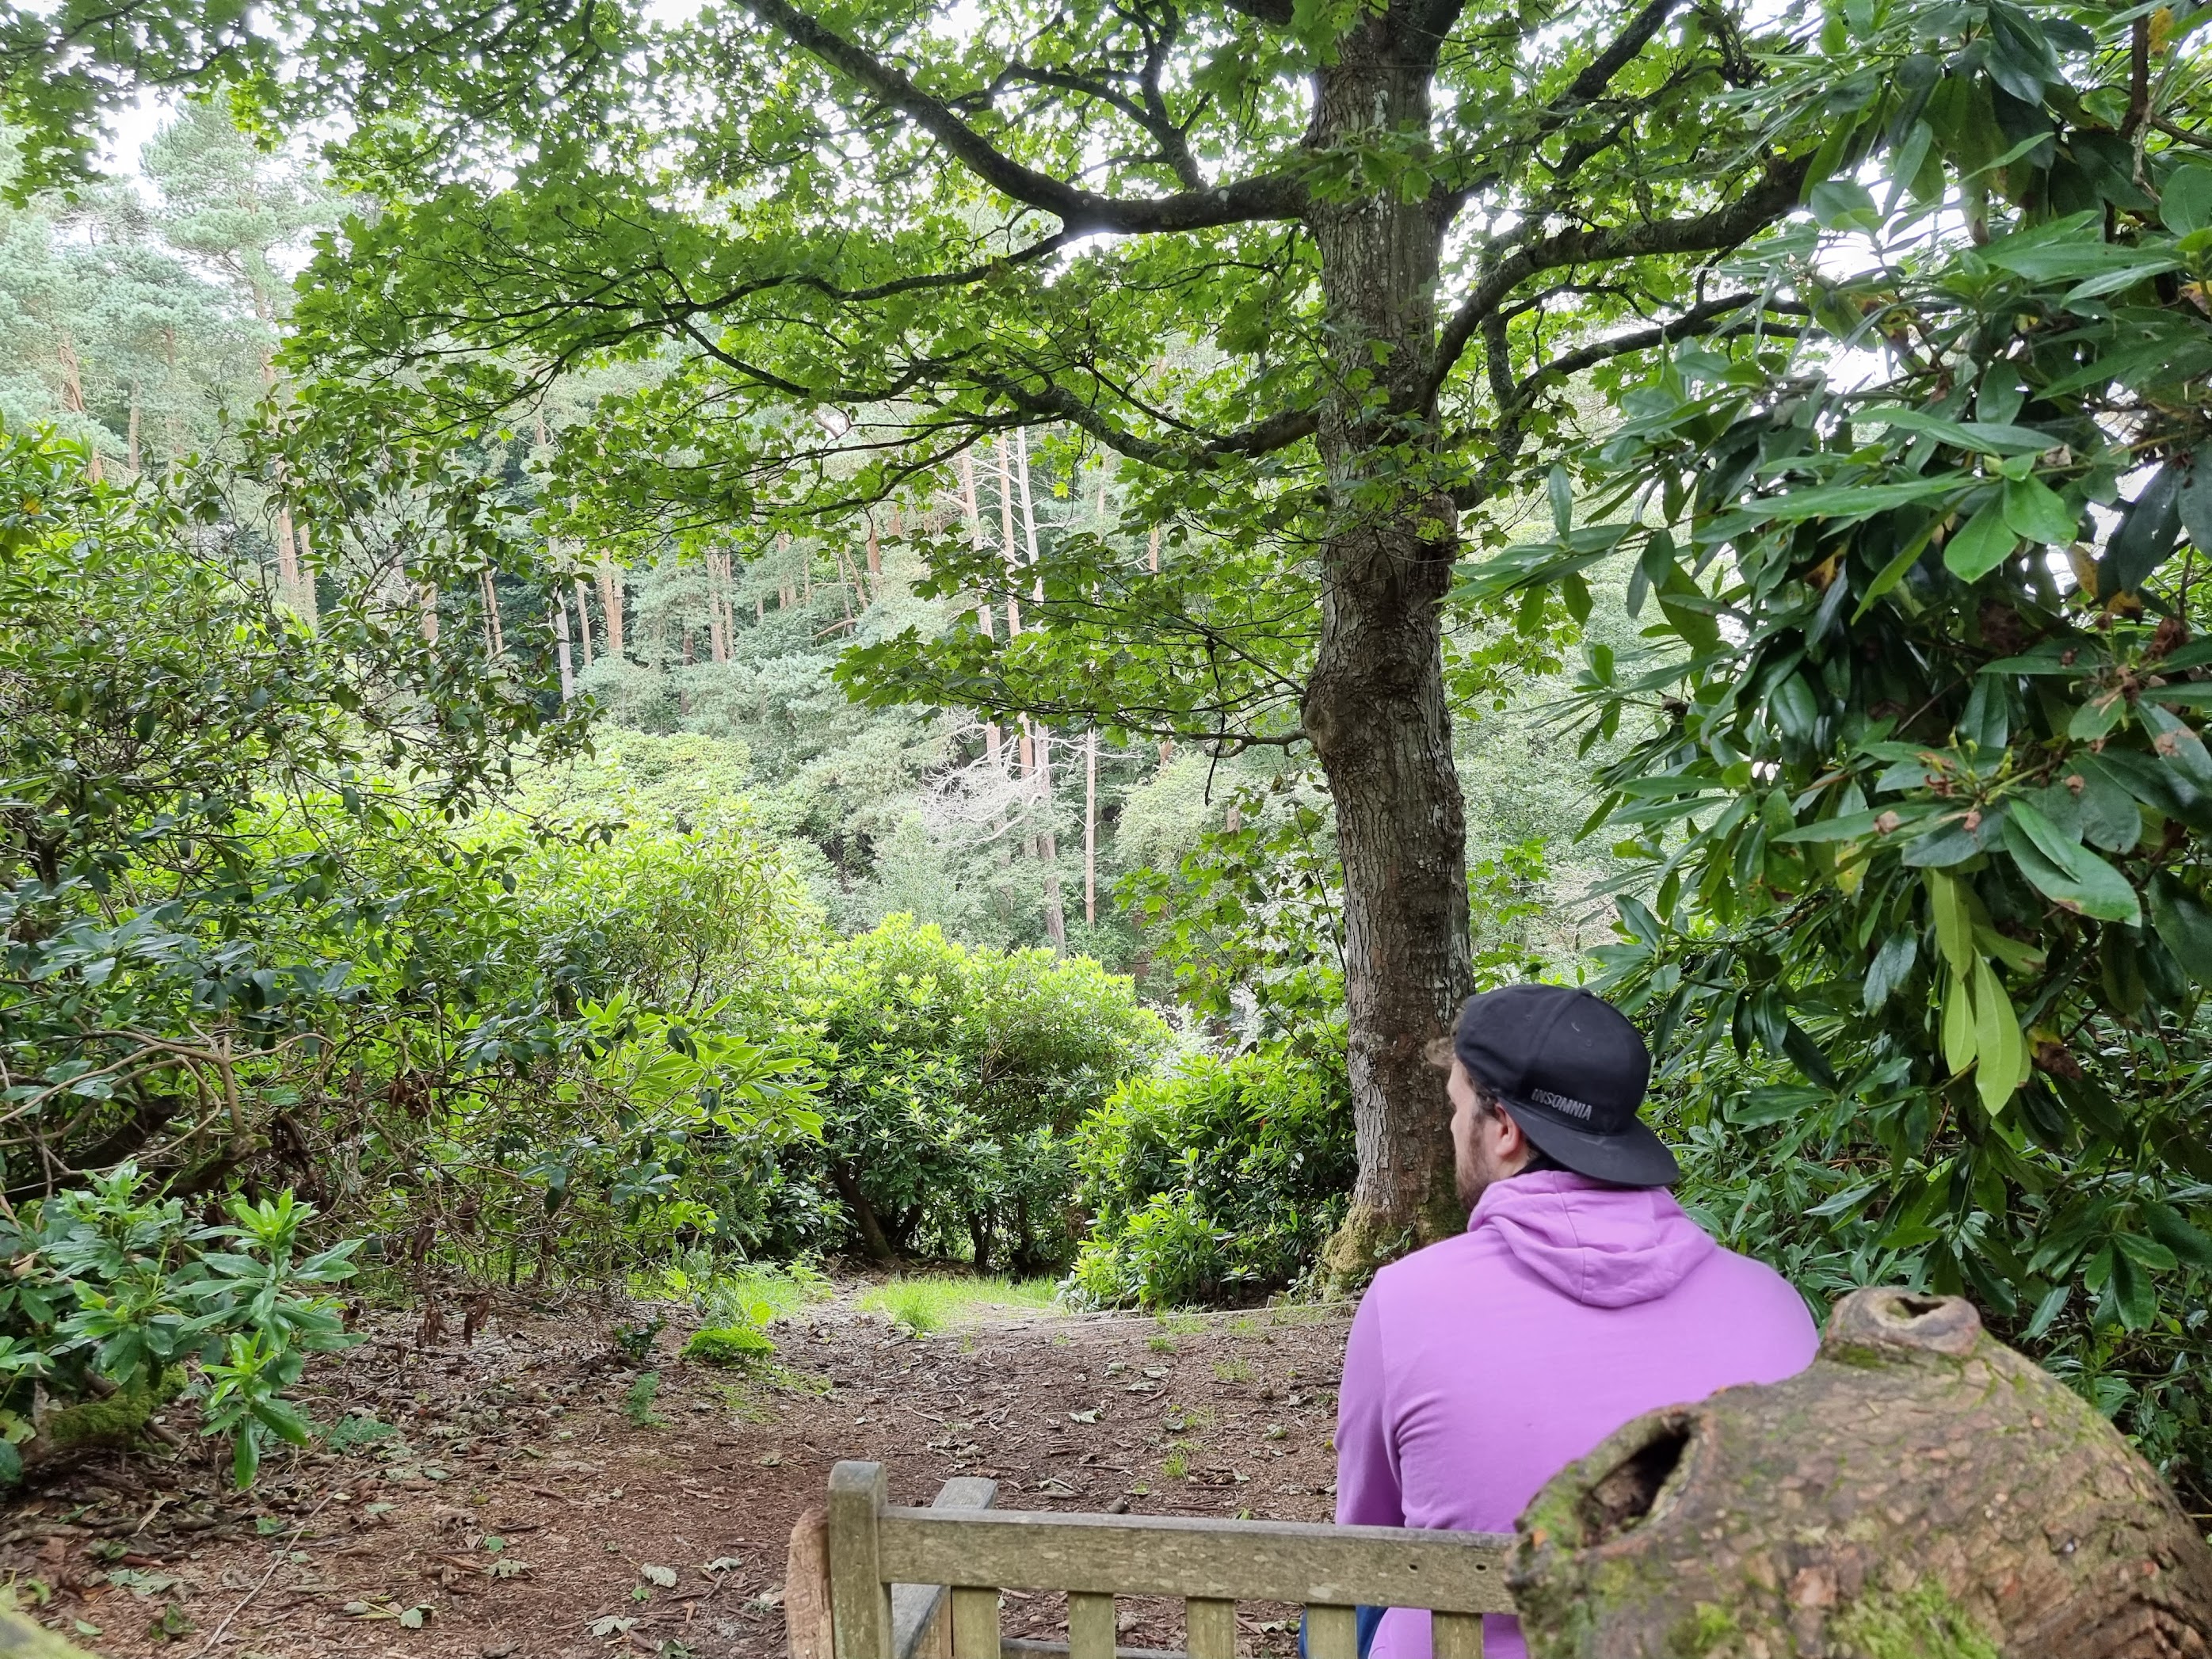 A photo of my friend Will sat on a bench in the woods pretending to look sad